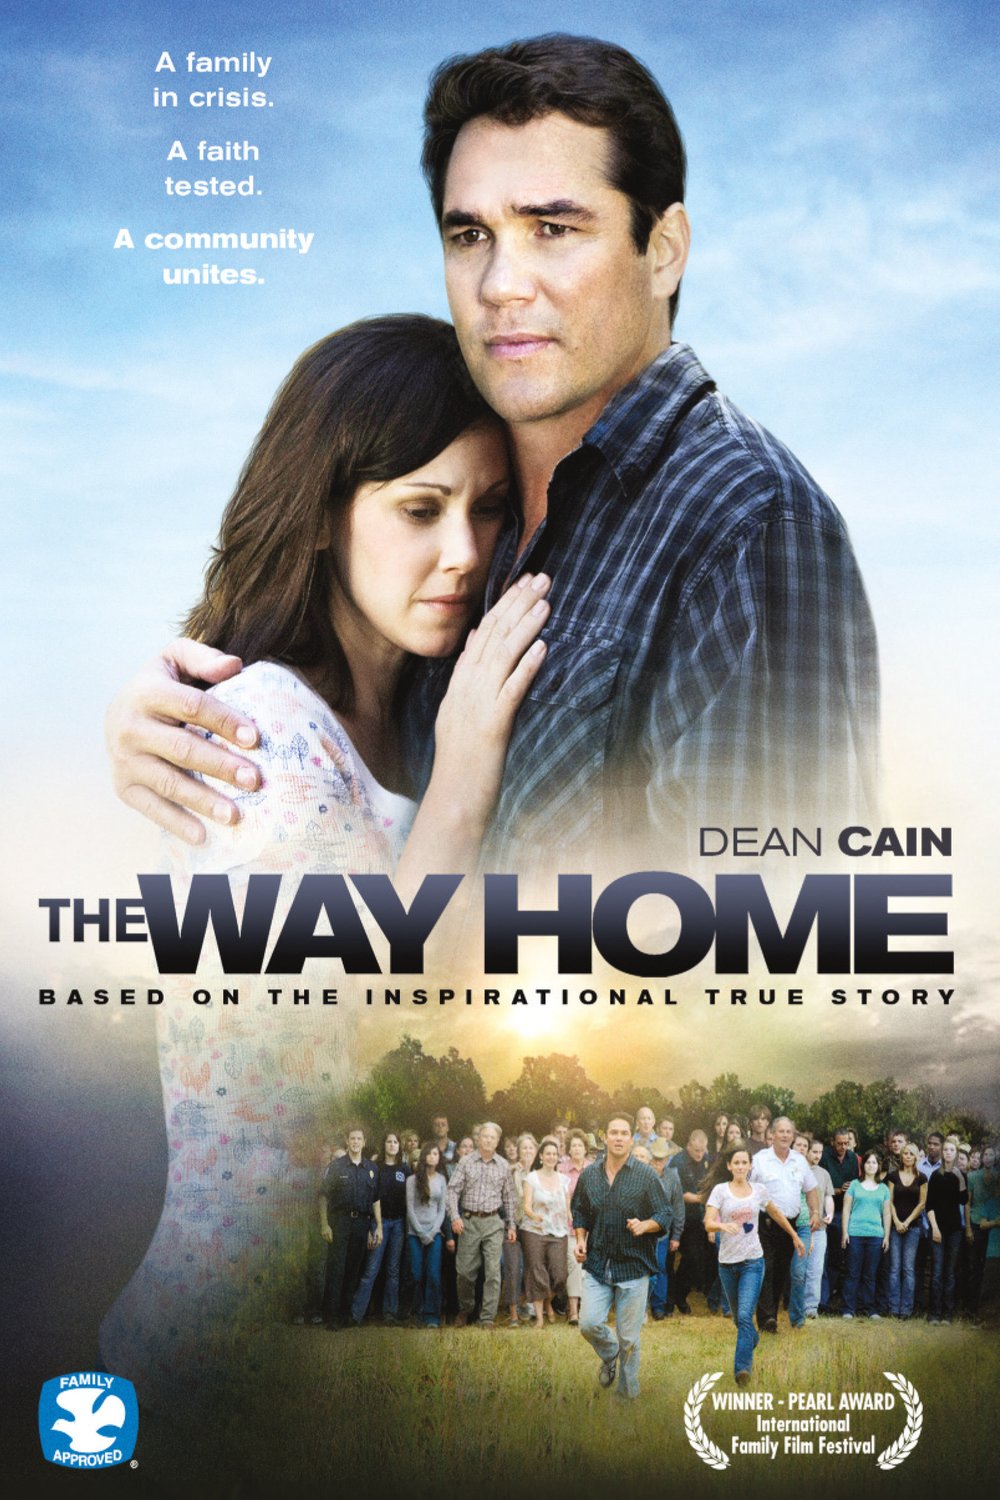 Poster of the movie The Way Home